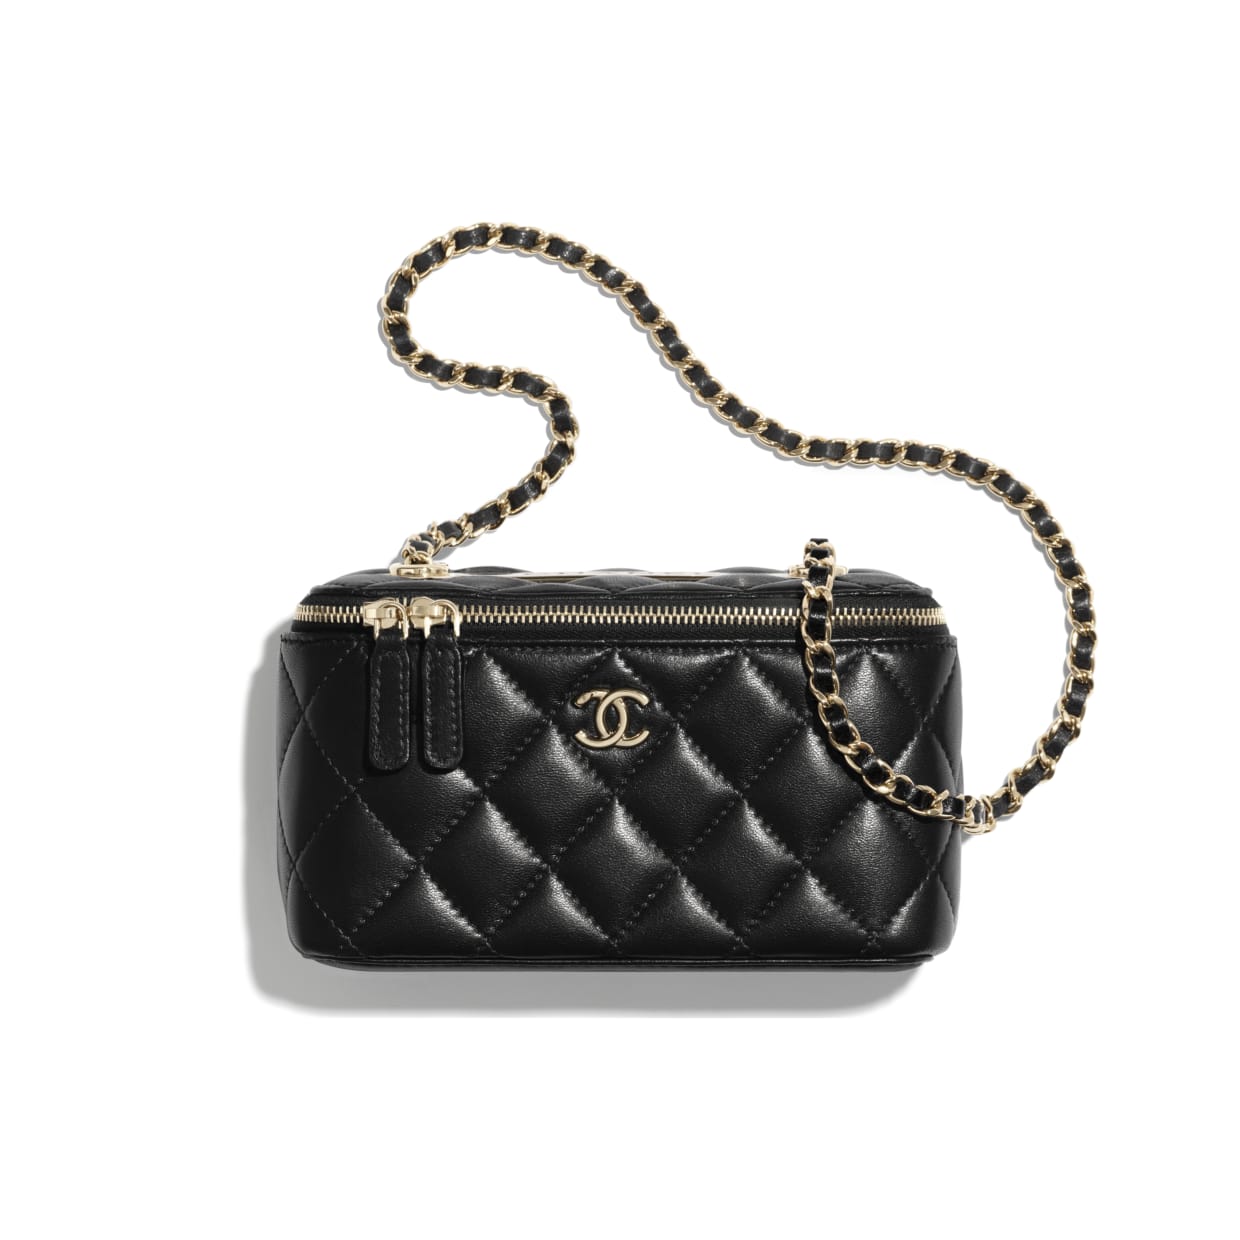 Chanel Métiers d'Art Pre-Fall 2020 Small Leather Goods Collection - Spotted  Fashion